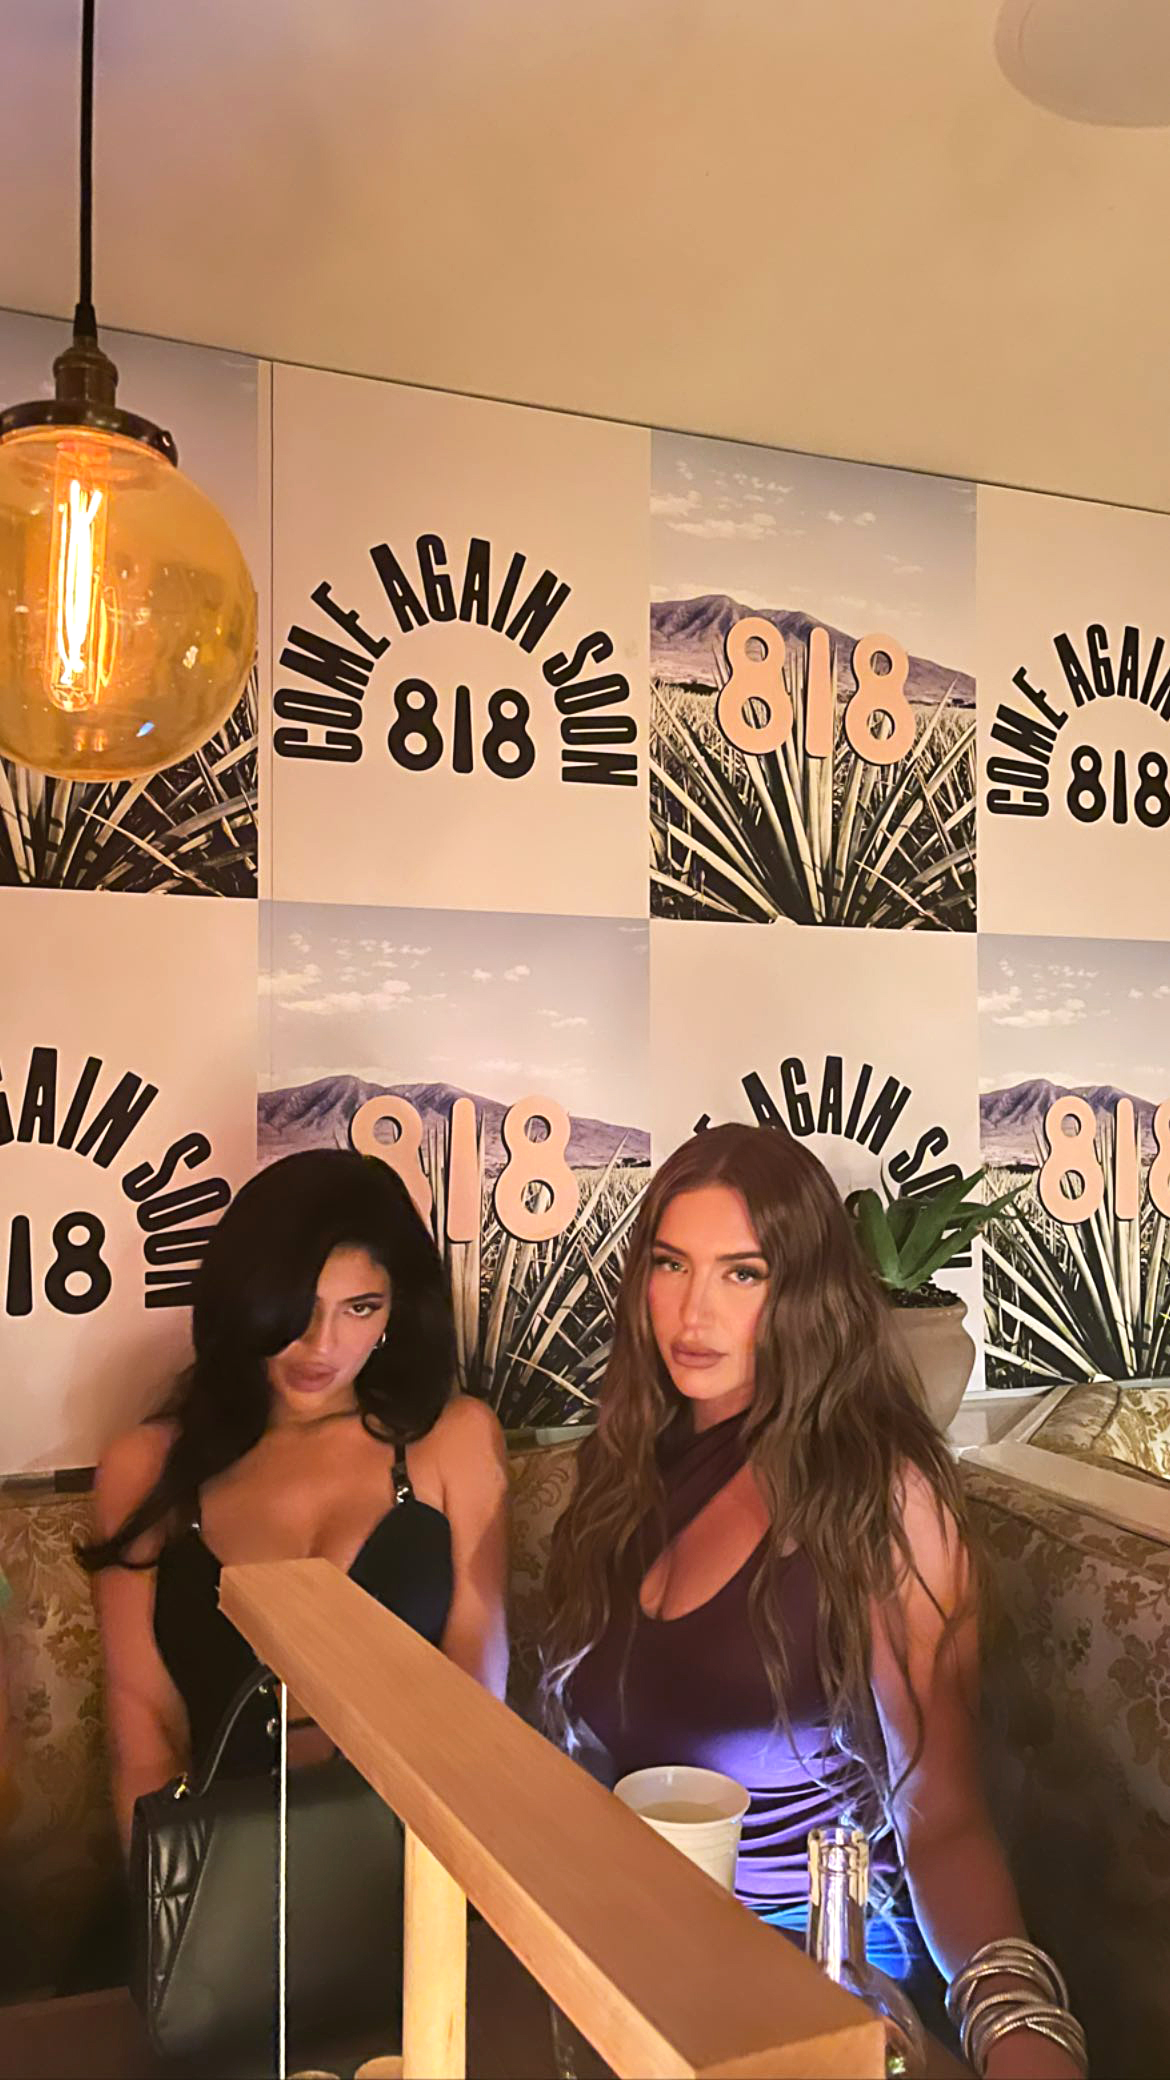 Photos from Kendall Jenner's Star-Studded 818 Tequila Launch Party - Page 2